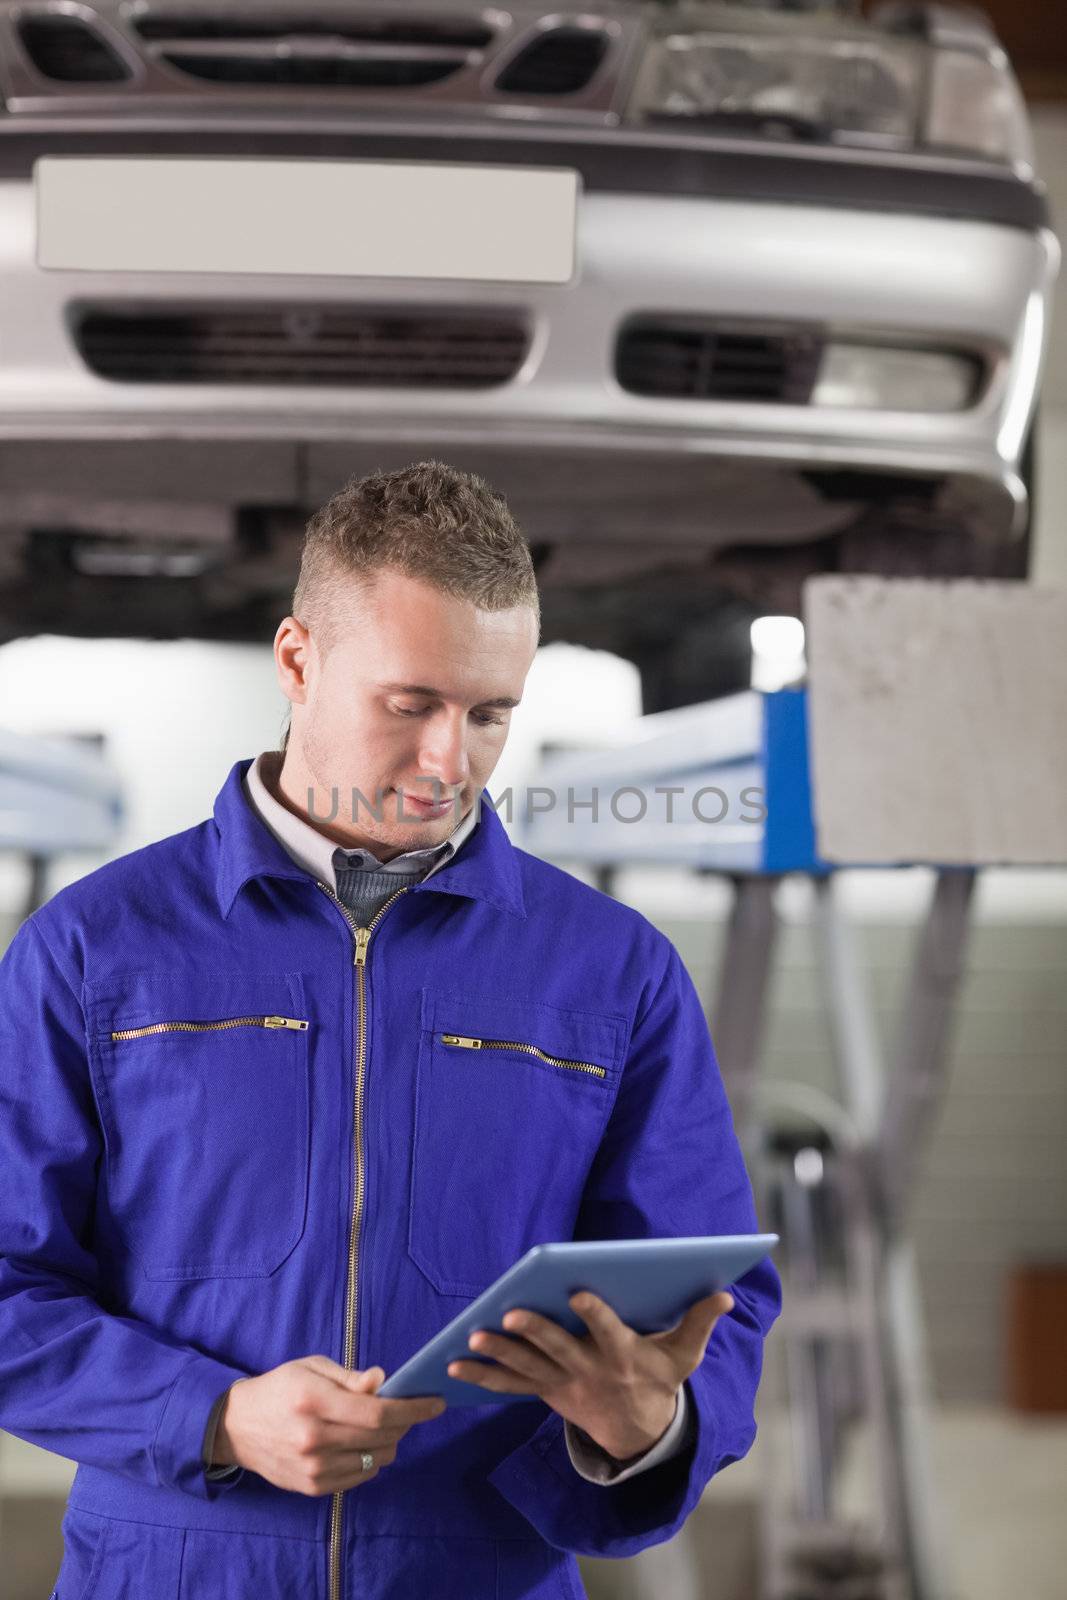 Mechanic looking at a tablet computer while holding it in a garage